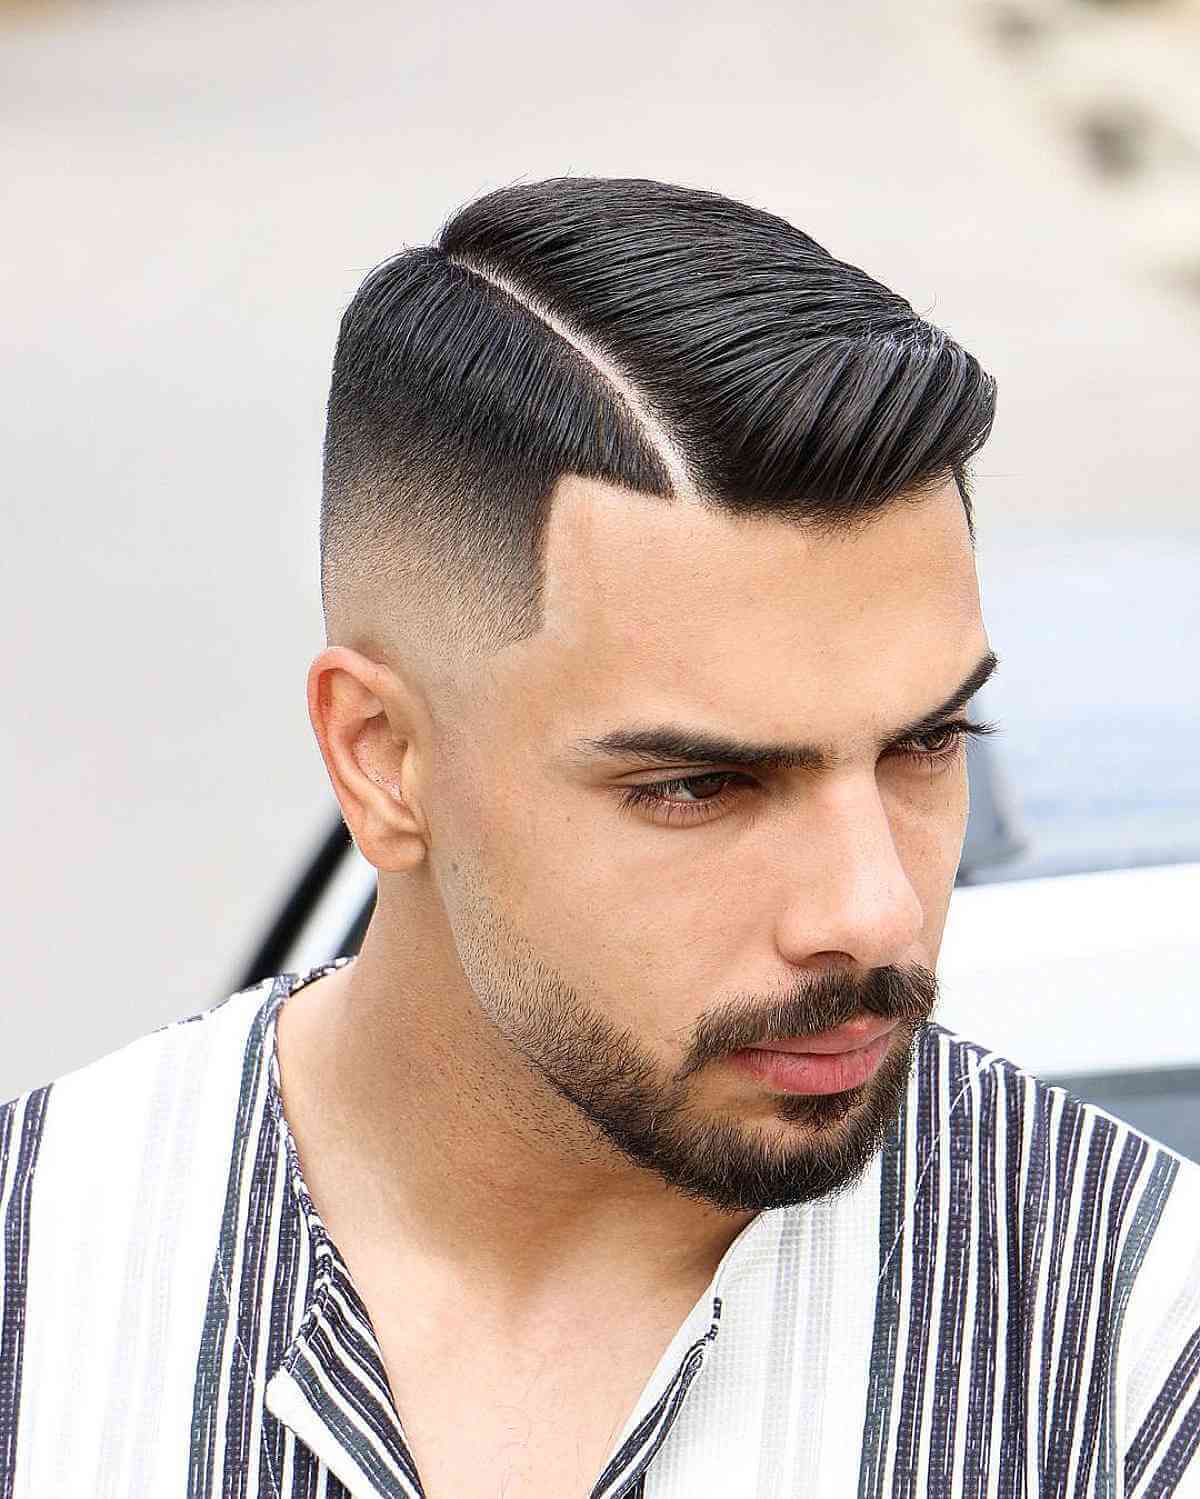 Chic Tapered Undercut with Side Part on Brunette Hair - The Latest  Hairstyles for Men and Women (2020) - Hairstyleology | Short hair styles,  Short pixie haircuts, Hair styles